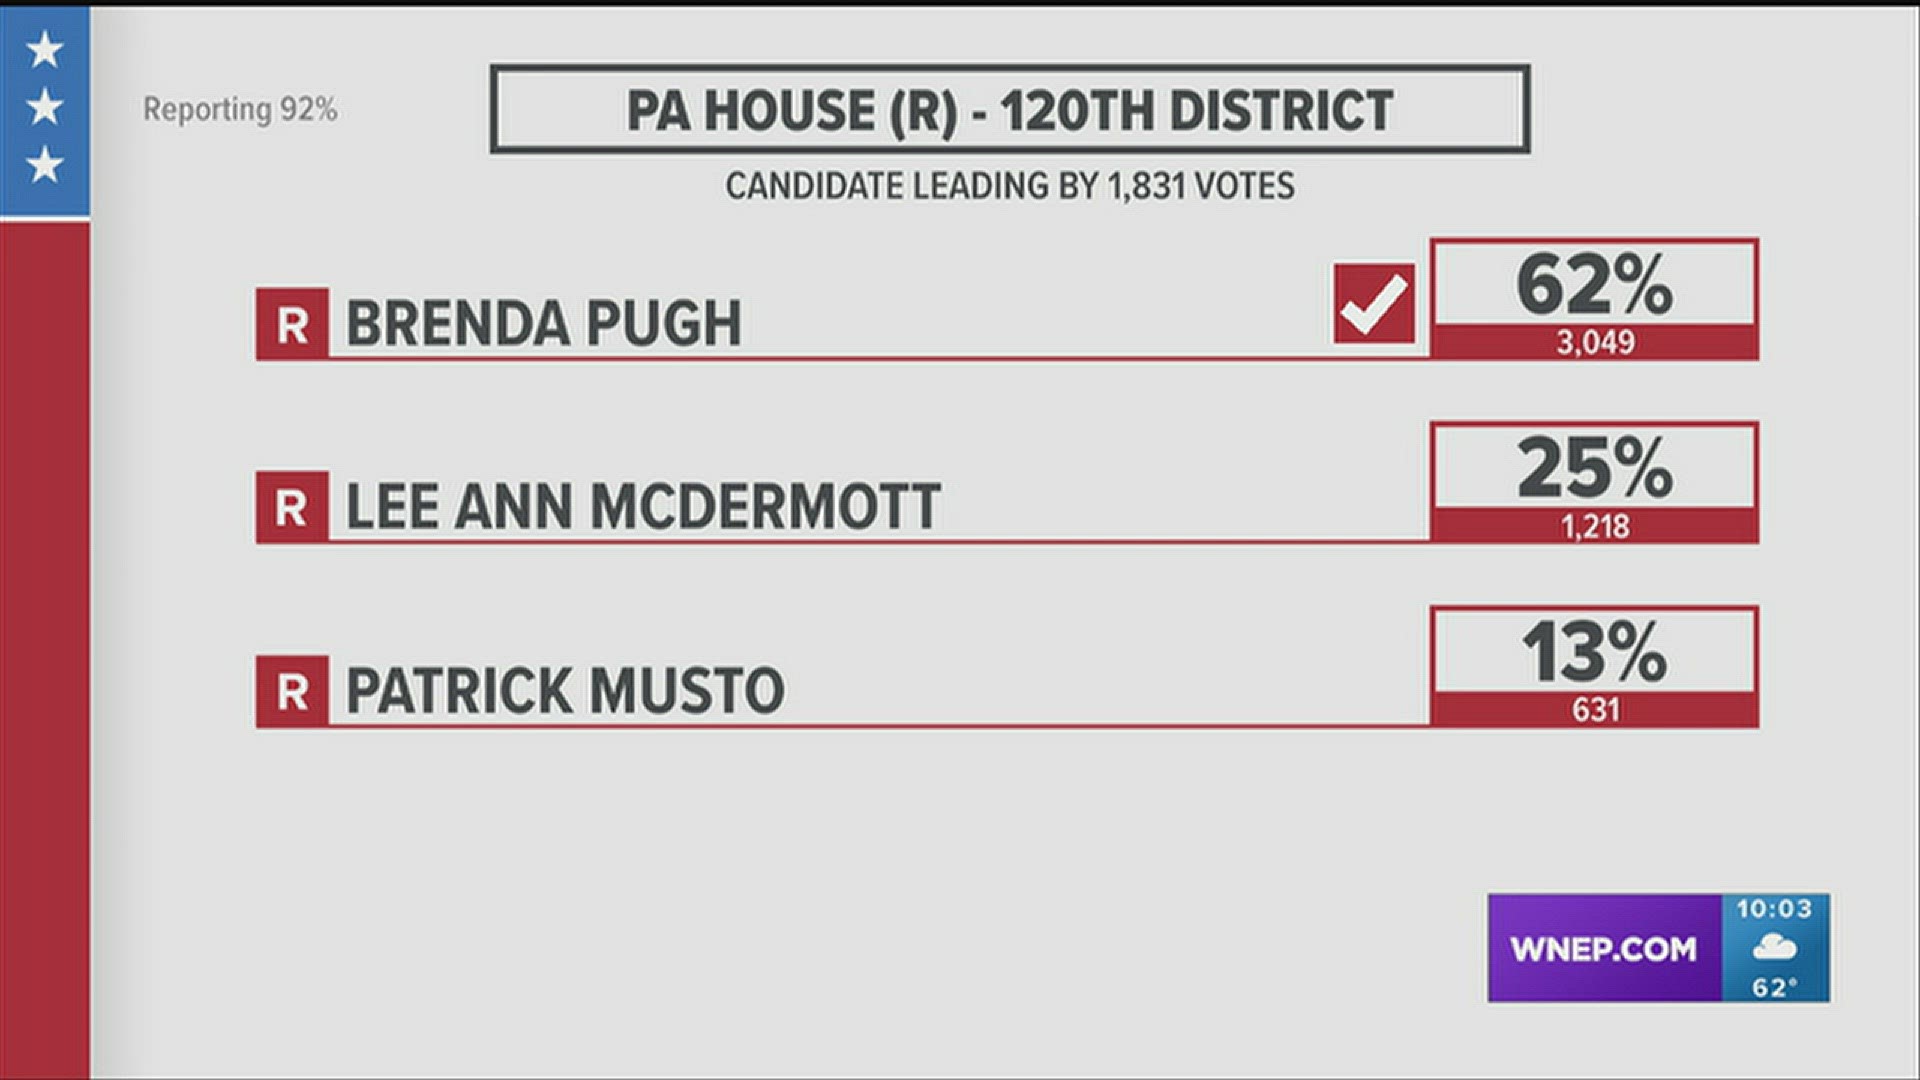 Brenda Pugh, business owner and chair of the Luzerne County Fair, declared victory in the Republican primary for a seat in the 120th State House District.